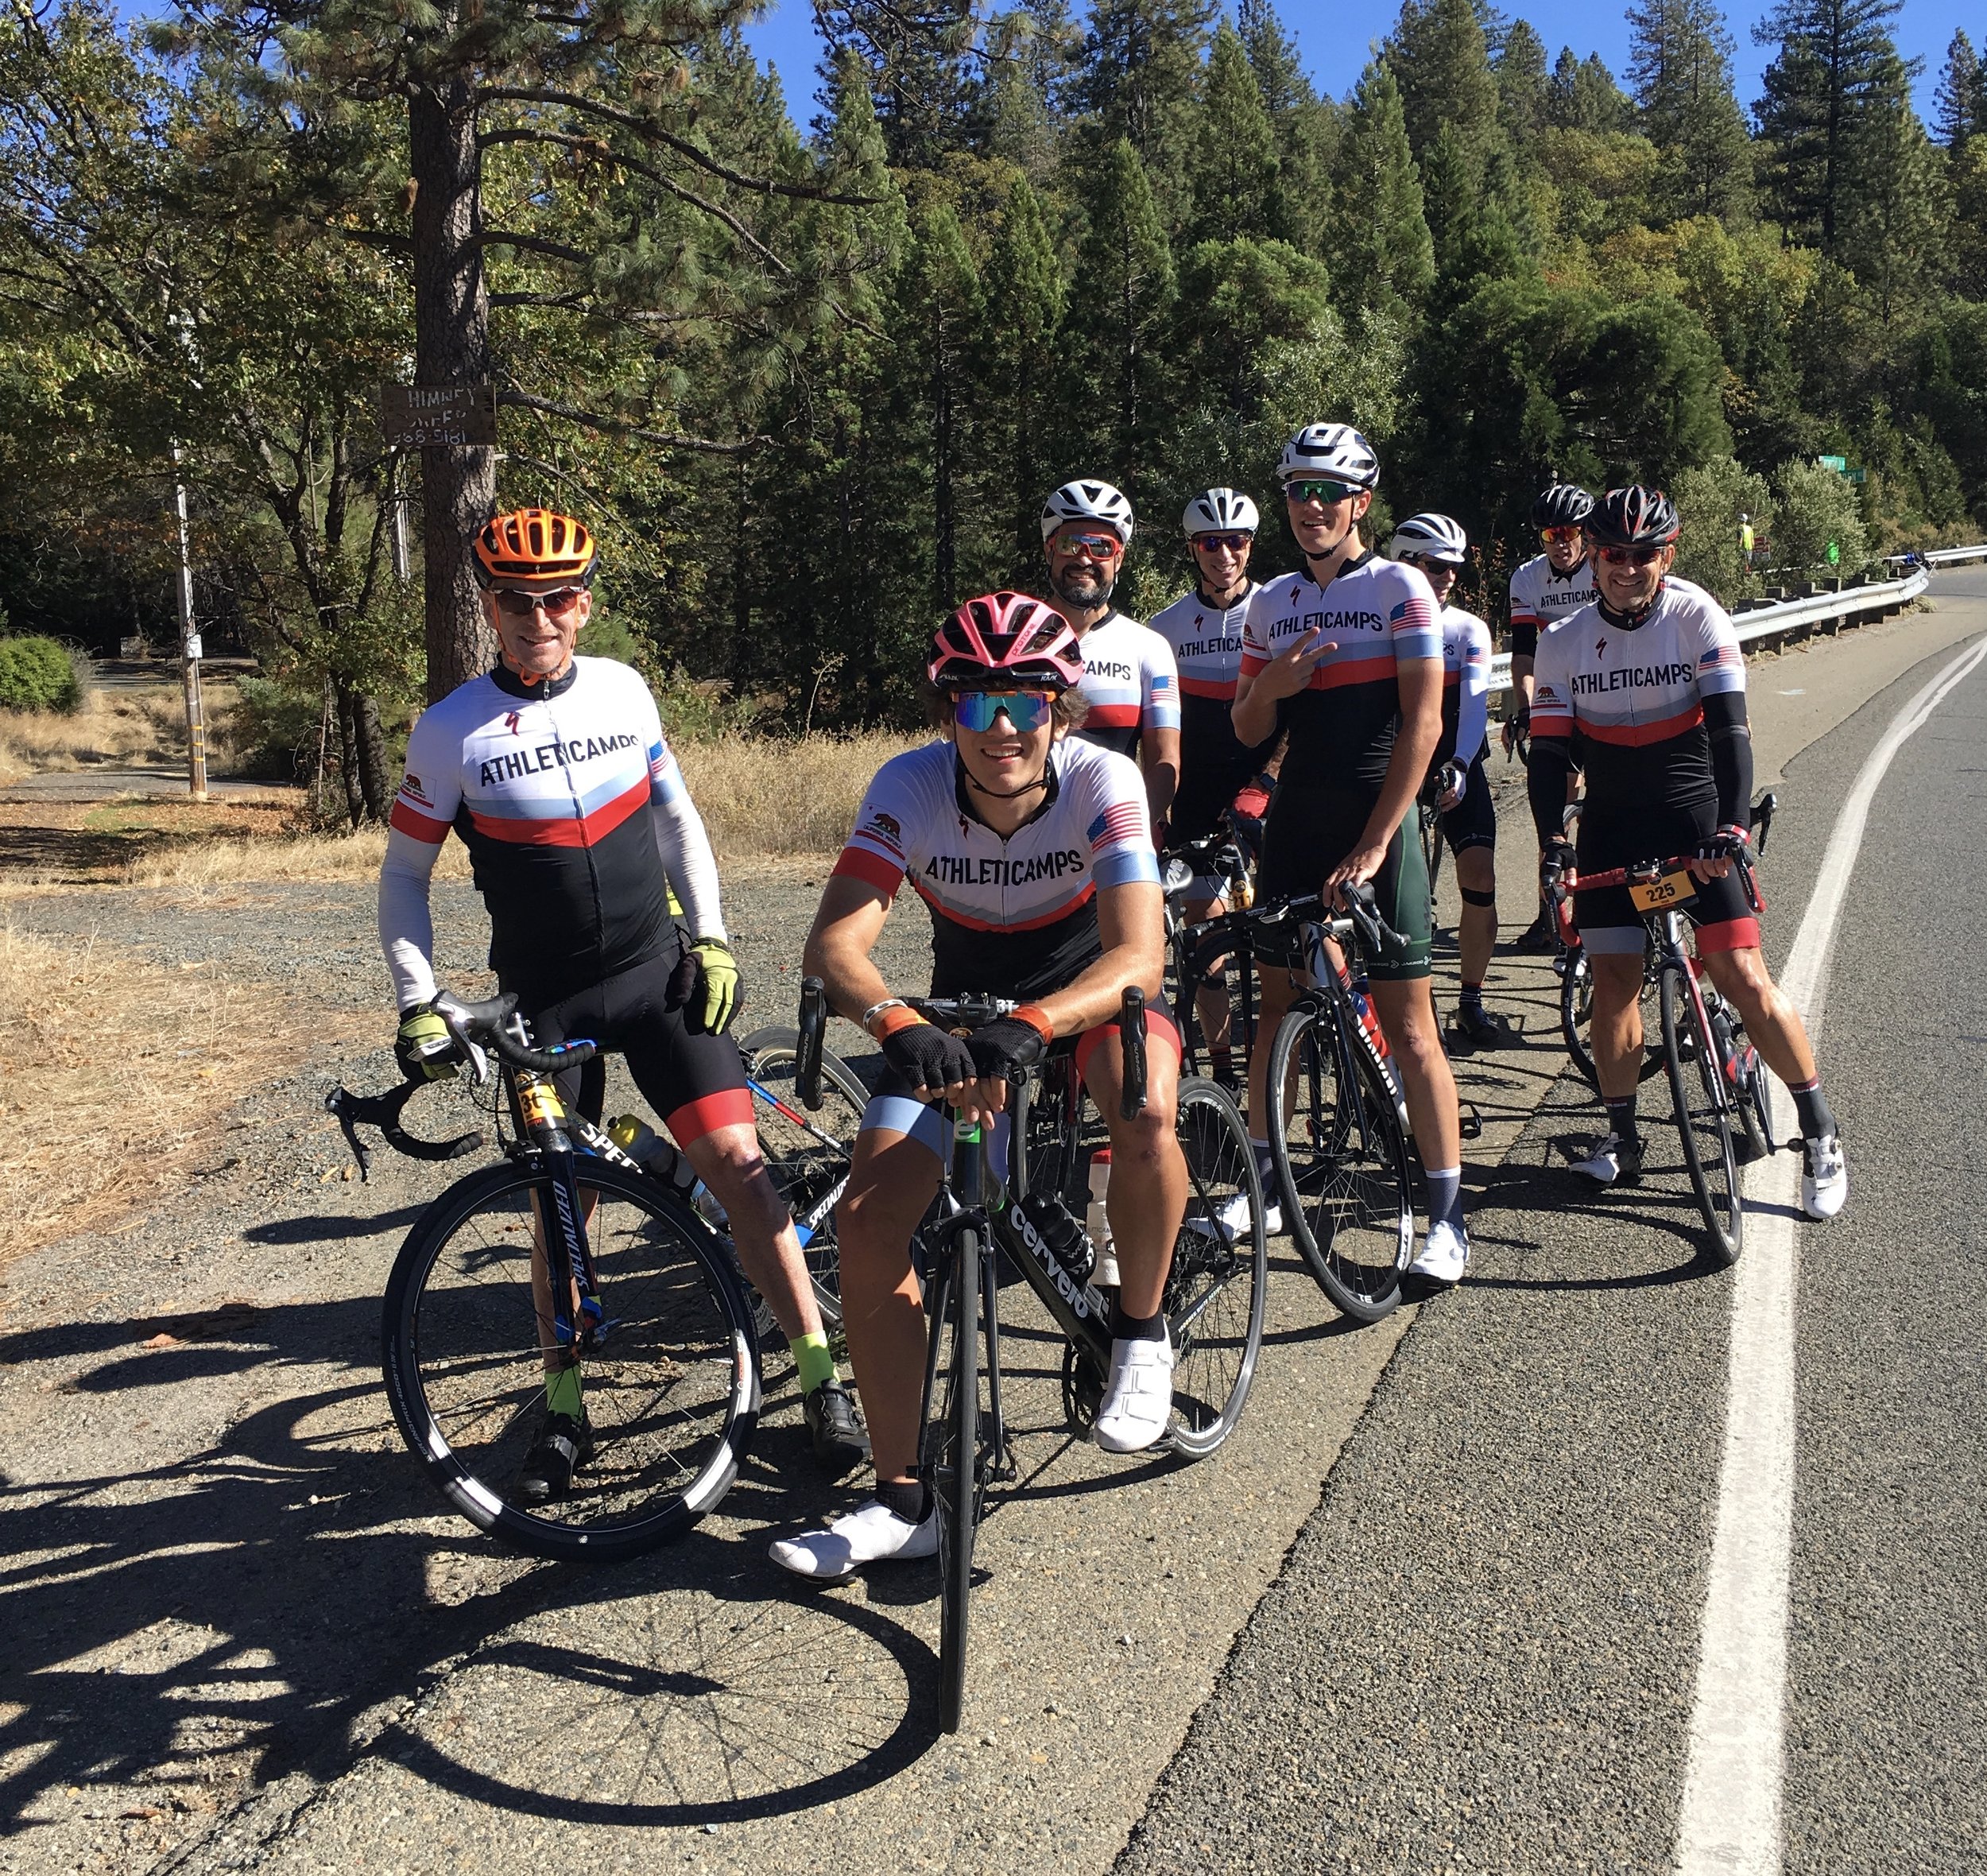 The gang on Foresthill road, ready to begin the ride back to Folsom